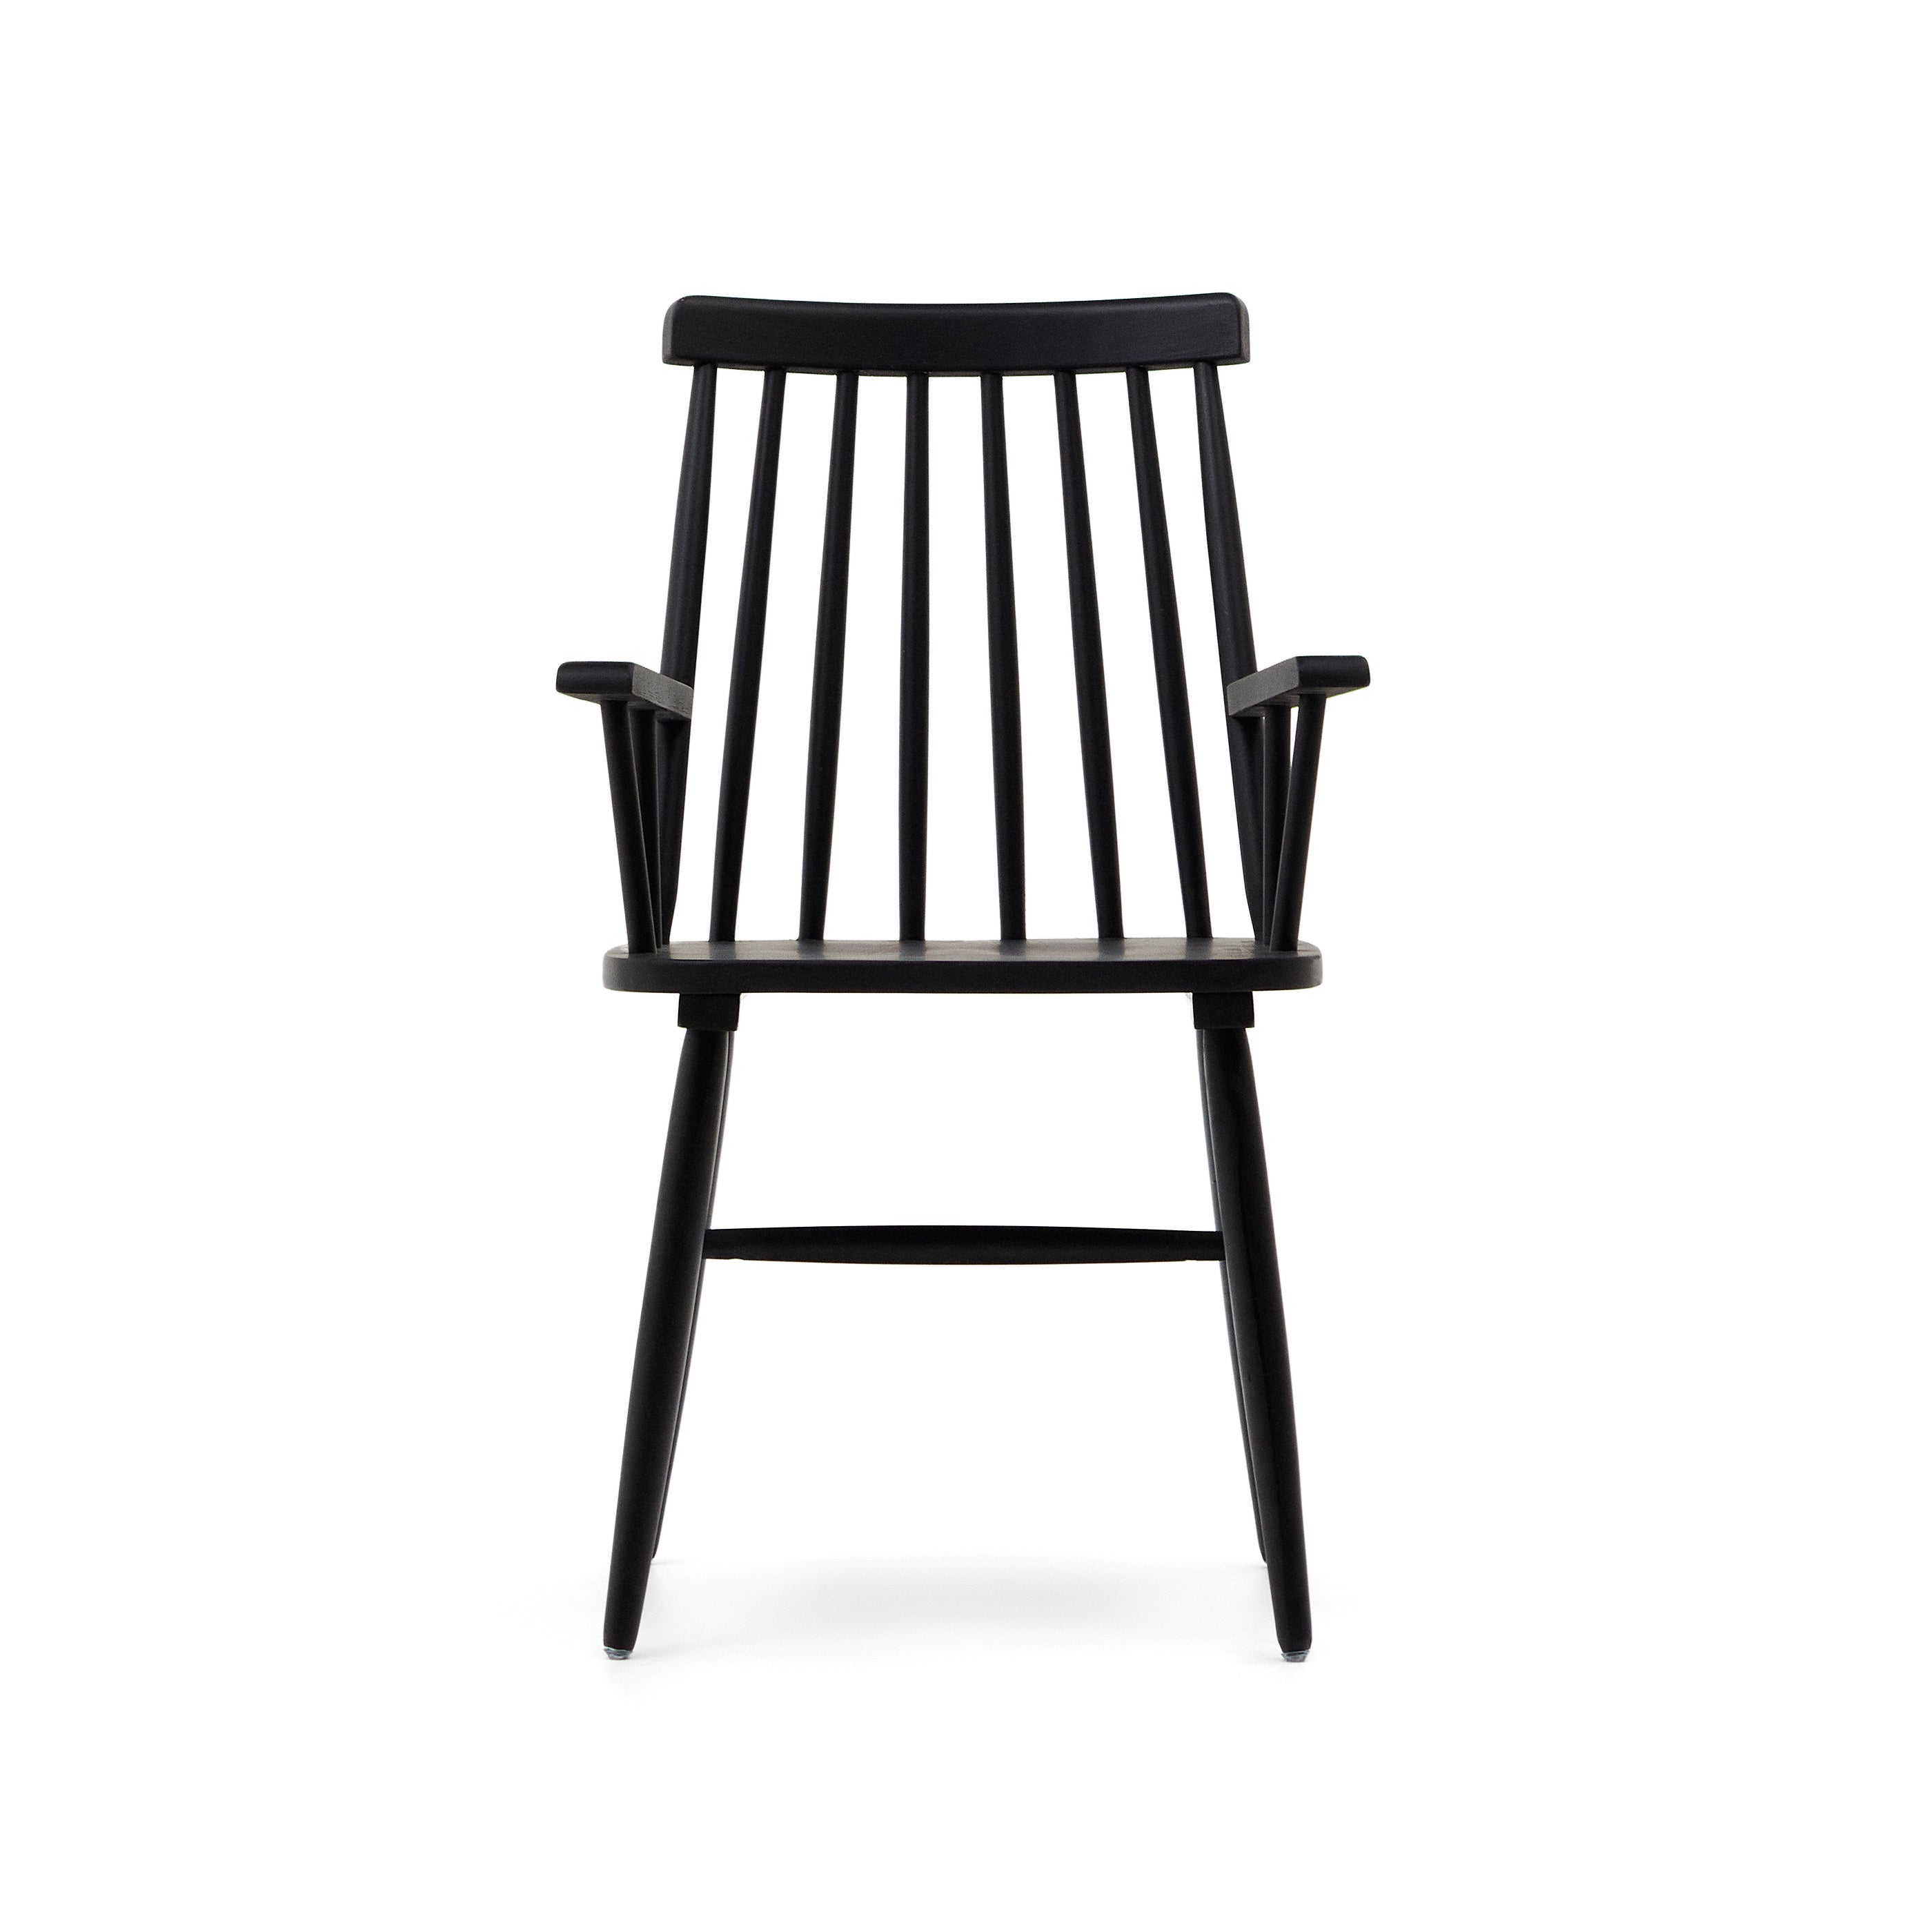 Black Tressia chair with armrests